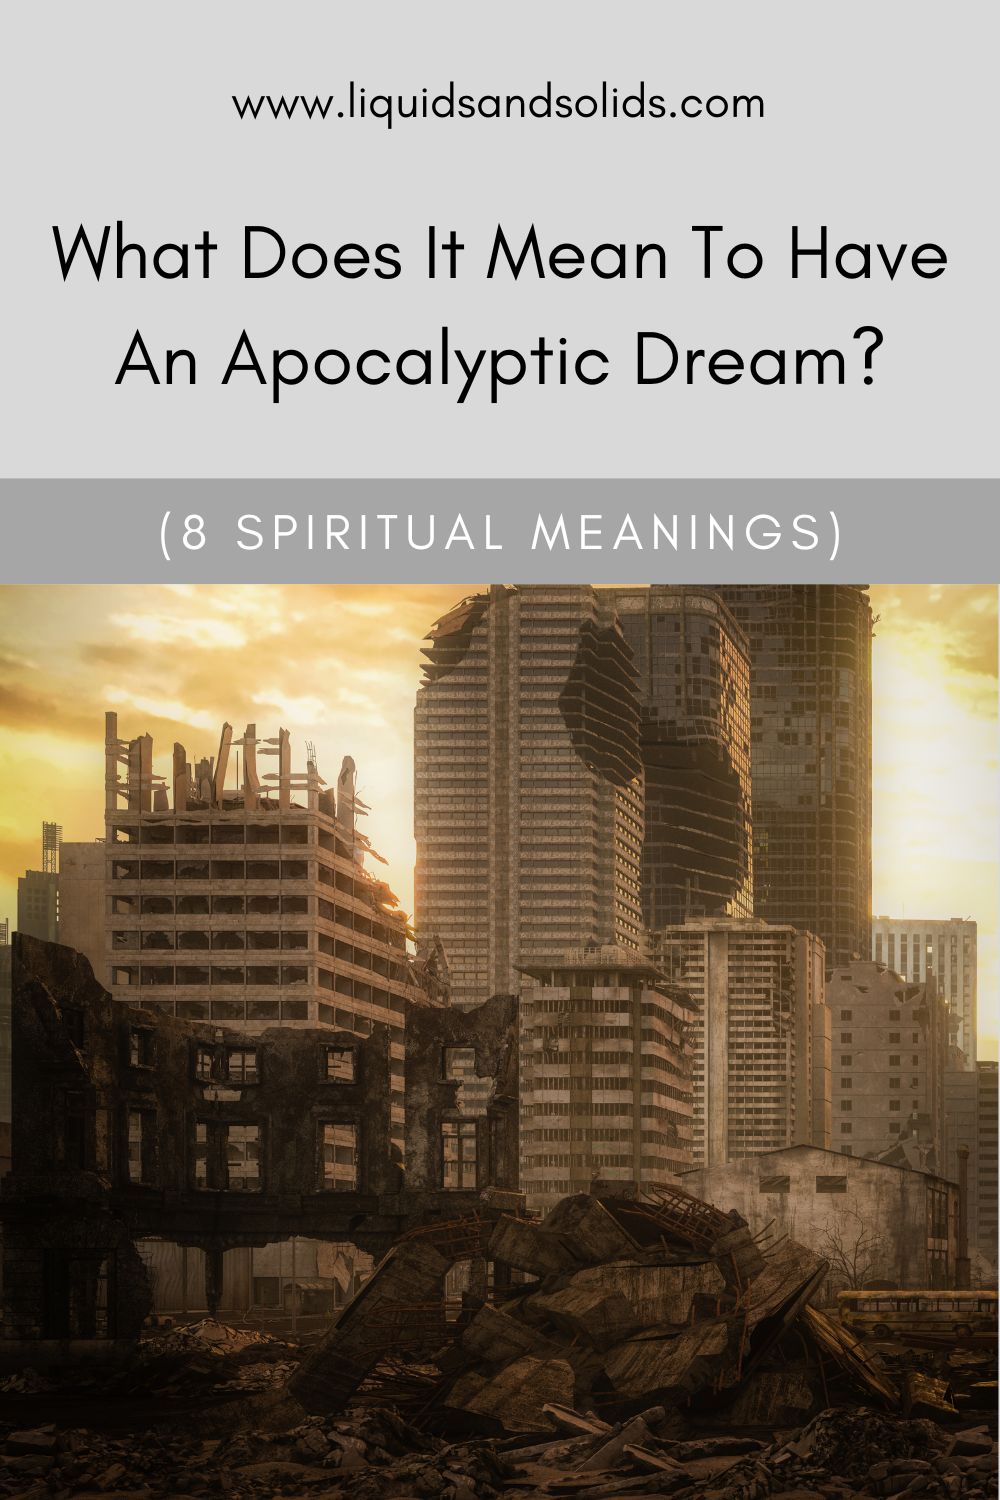 What Is A Dream Apocalypse?